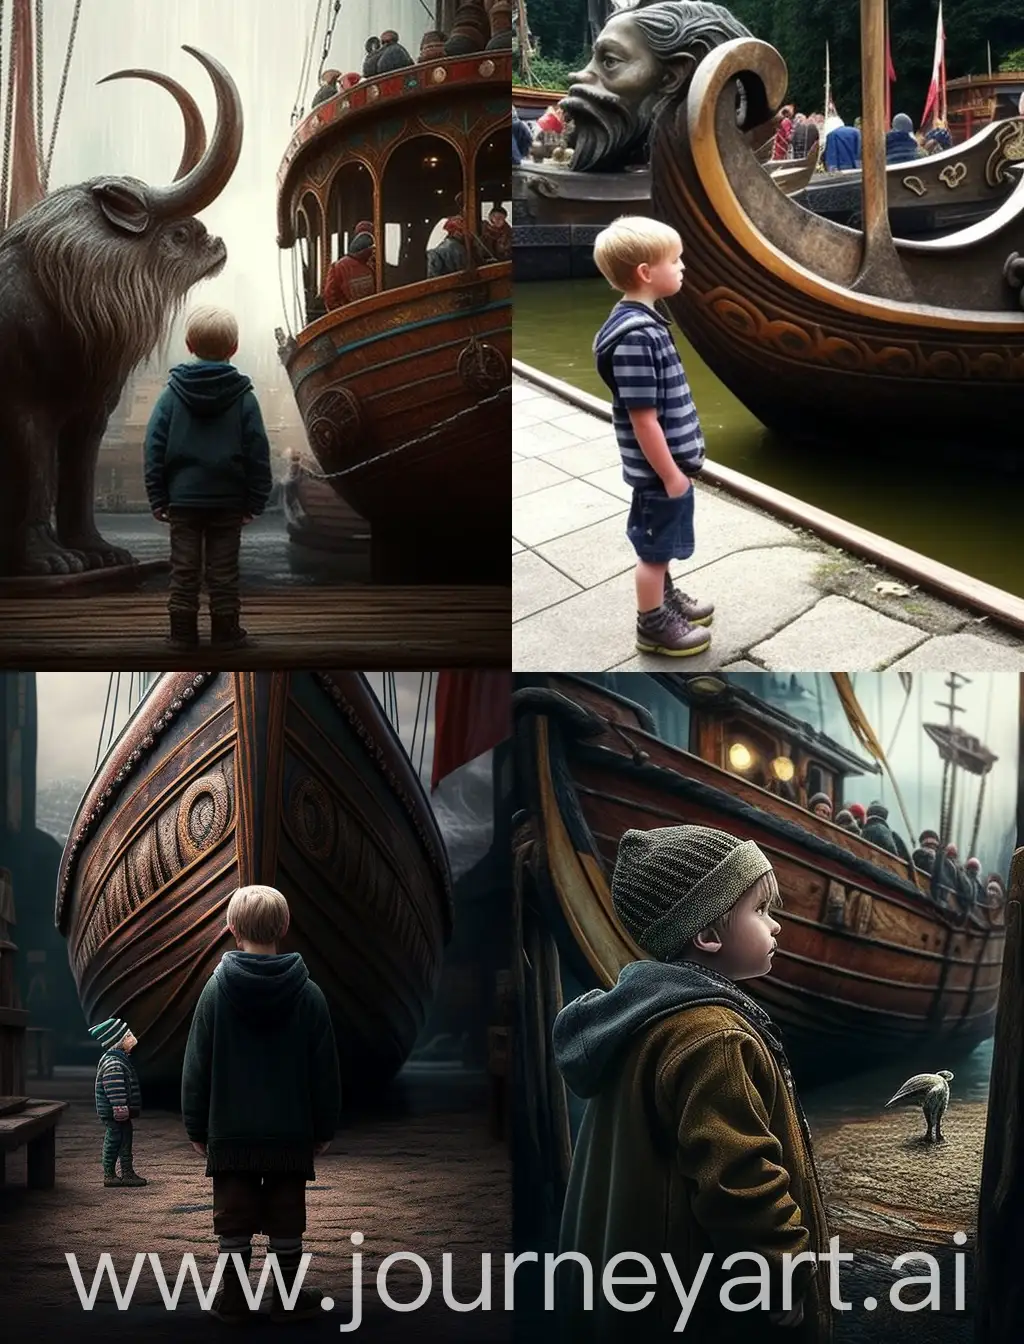 Boy-Waiting-in-Line-for-Viking-Ship-Ride-at-Amusement-Park